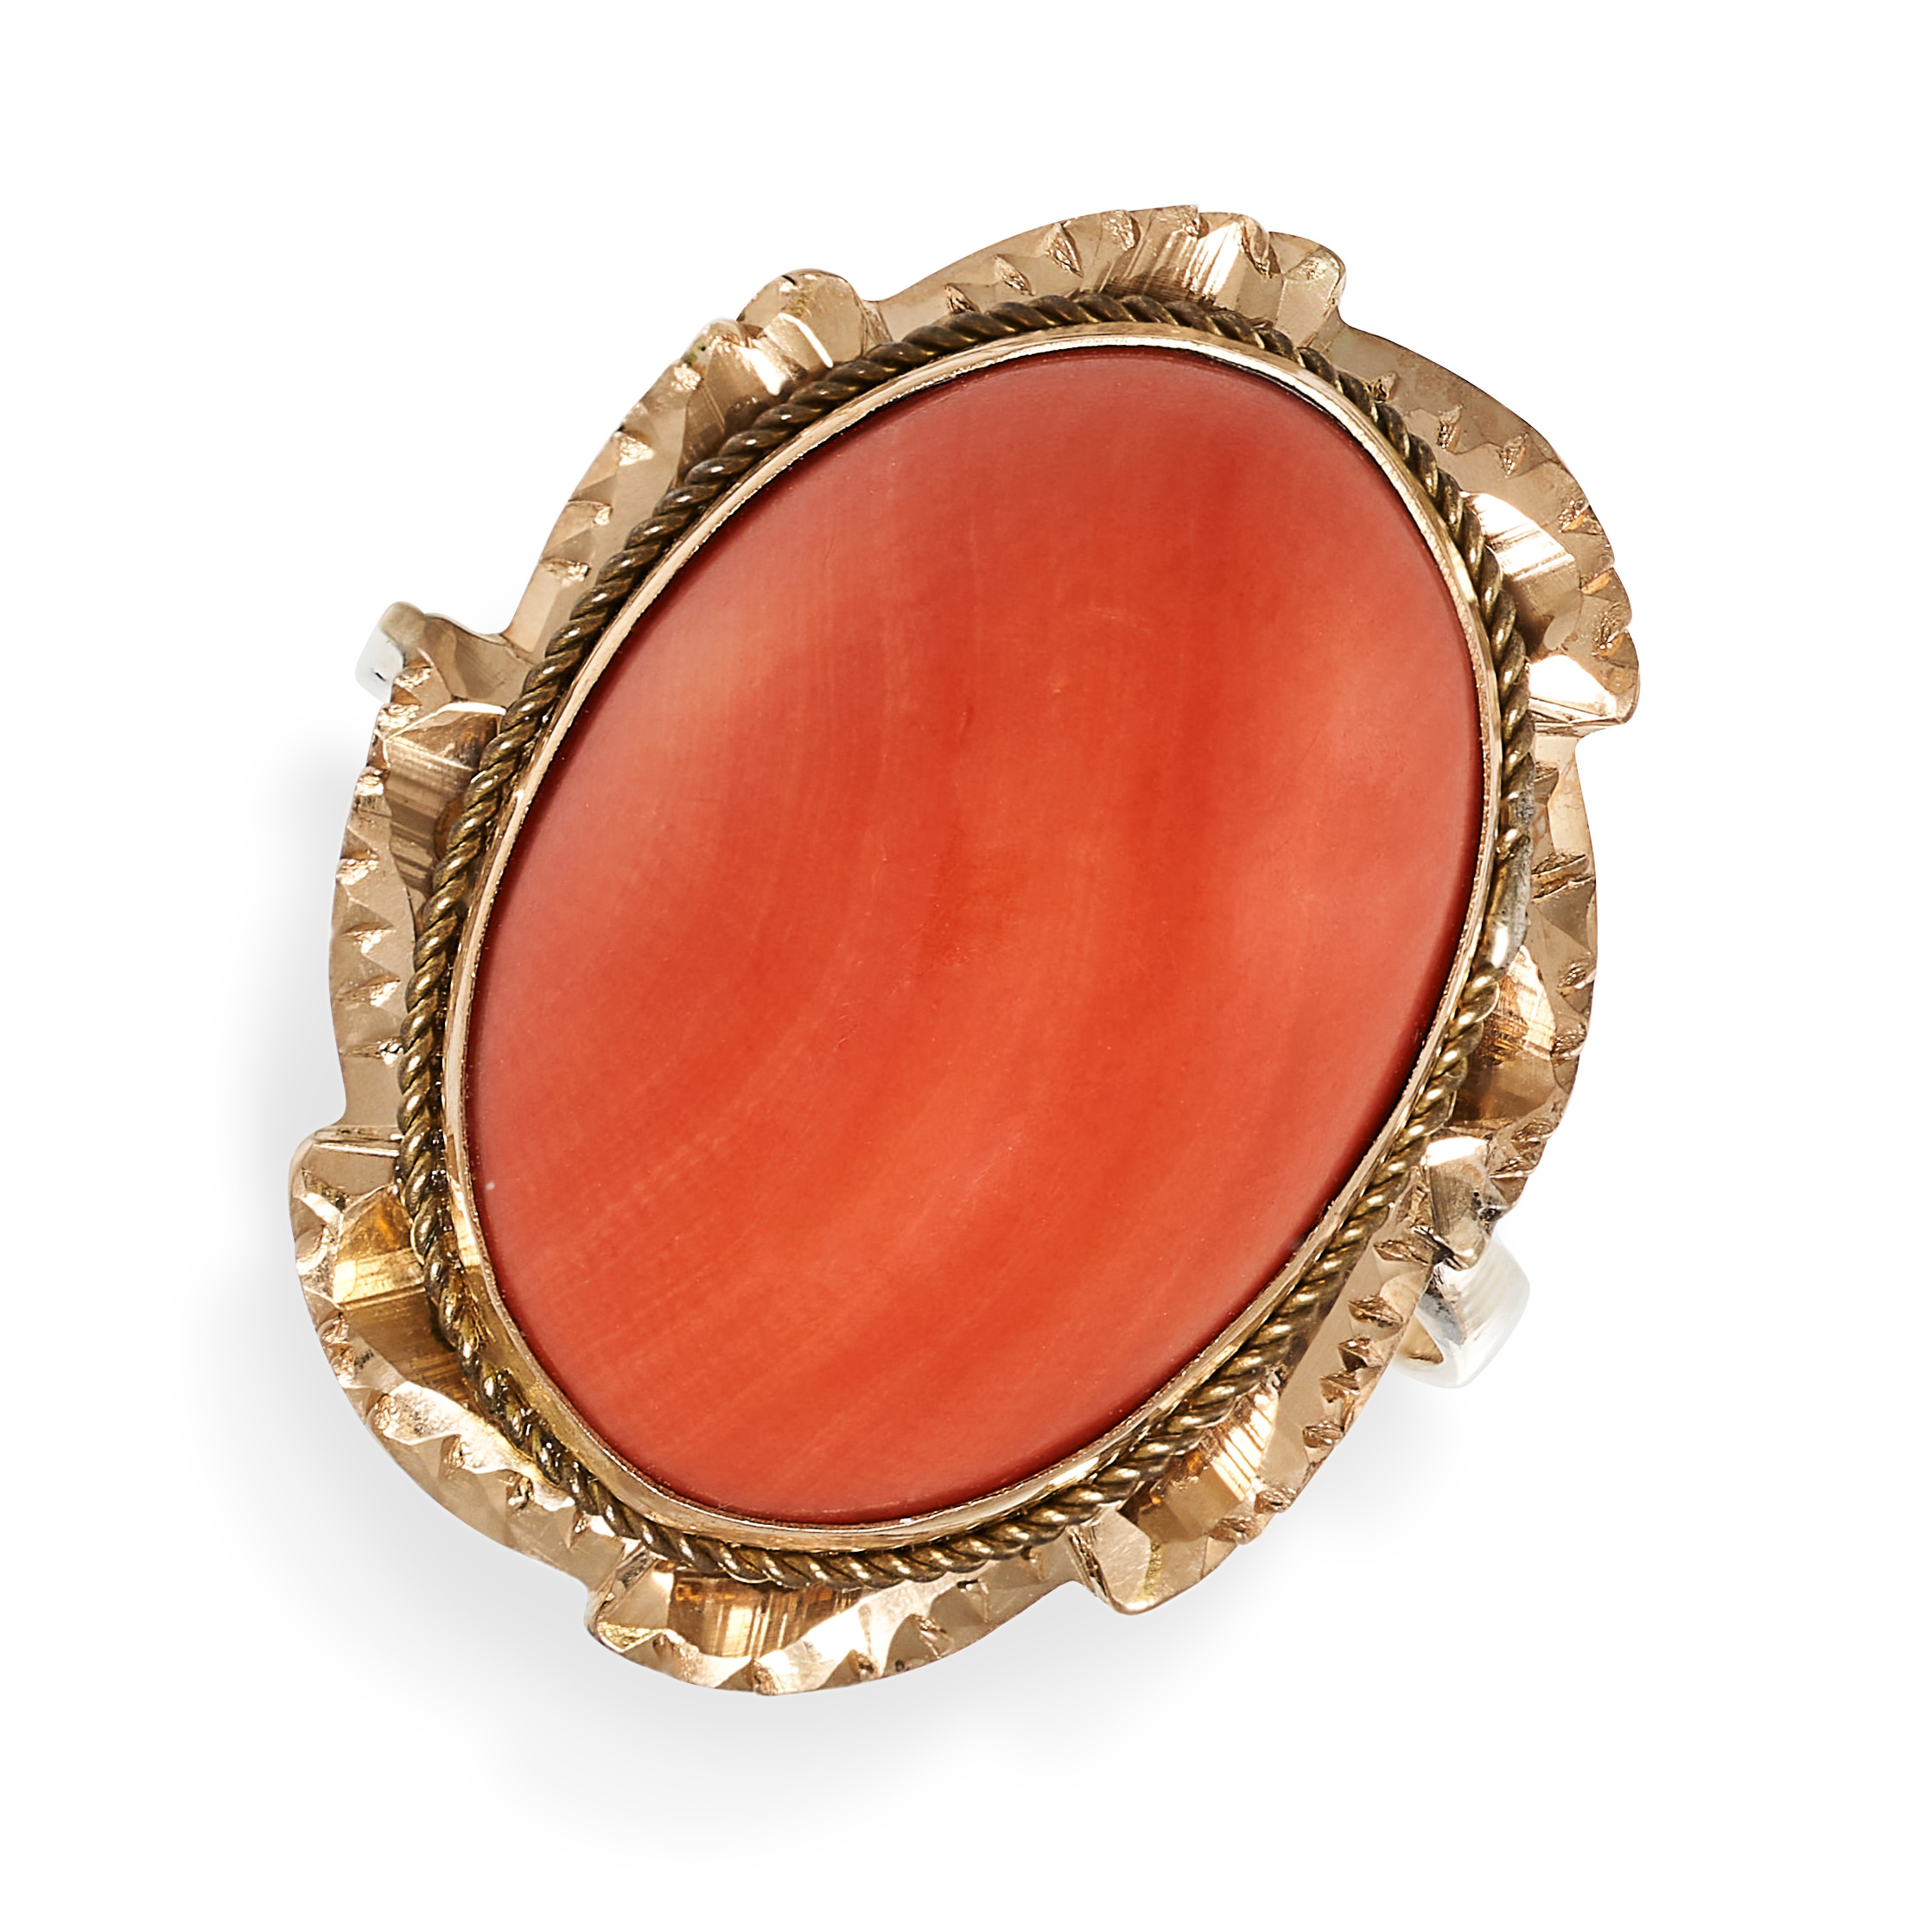 A VINTAGE CORAL RING in yellow gold, set with a cabochon coral, no assay marks, size M / 6, 4.8g.